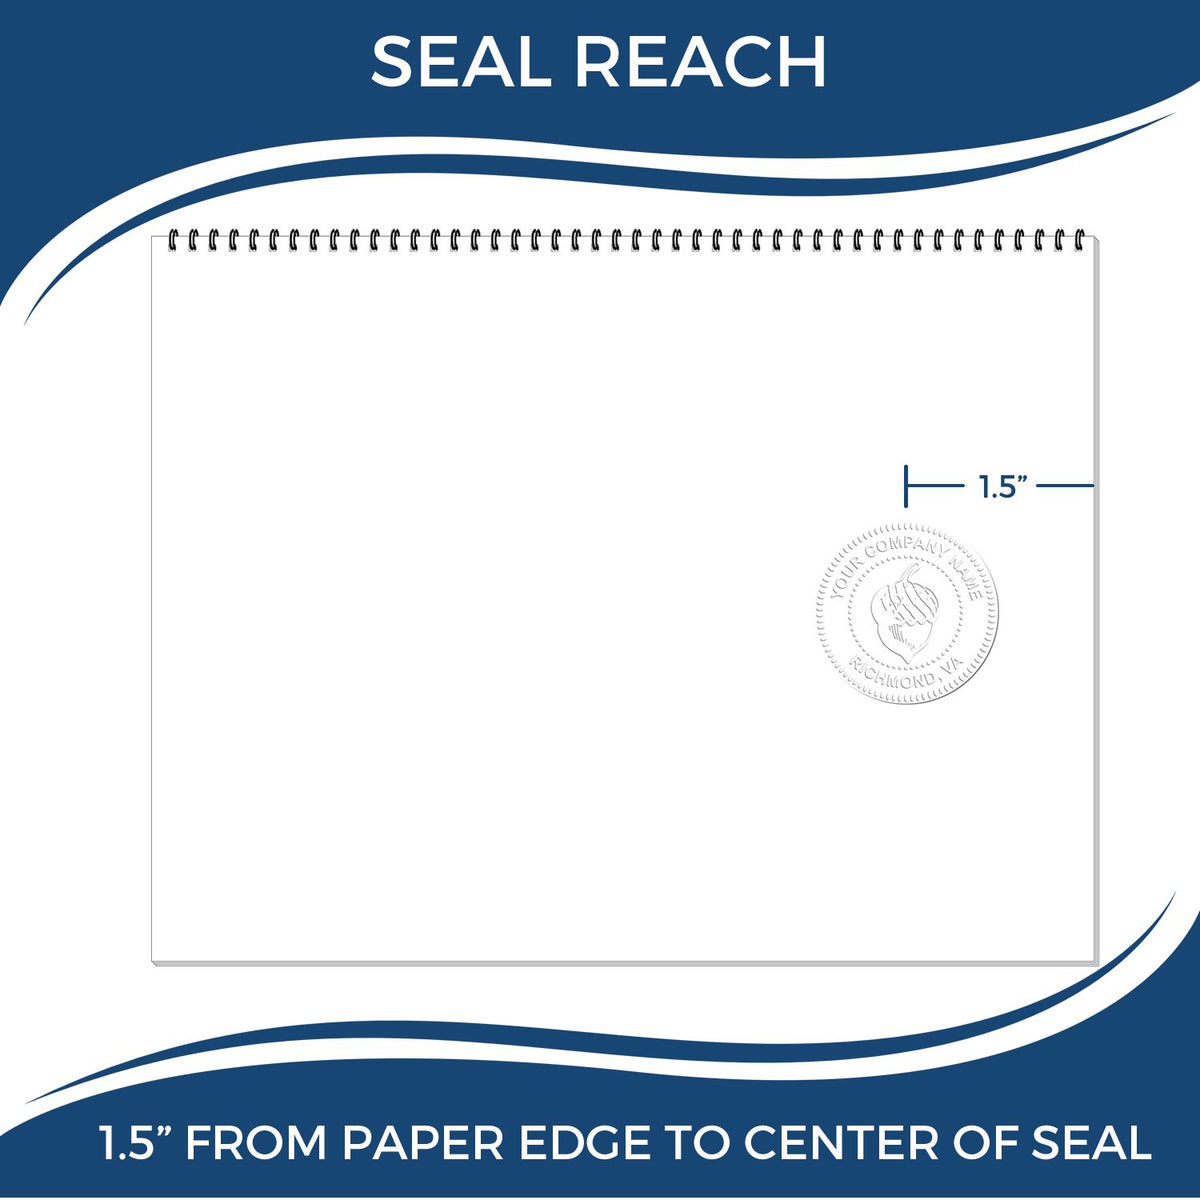 An infographic showing the seal reach which is represented by a ruler and a miniature seal image of the Soft Pocket Massachusetts Landscape Architect Embosser